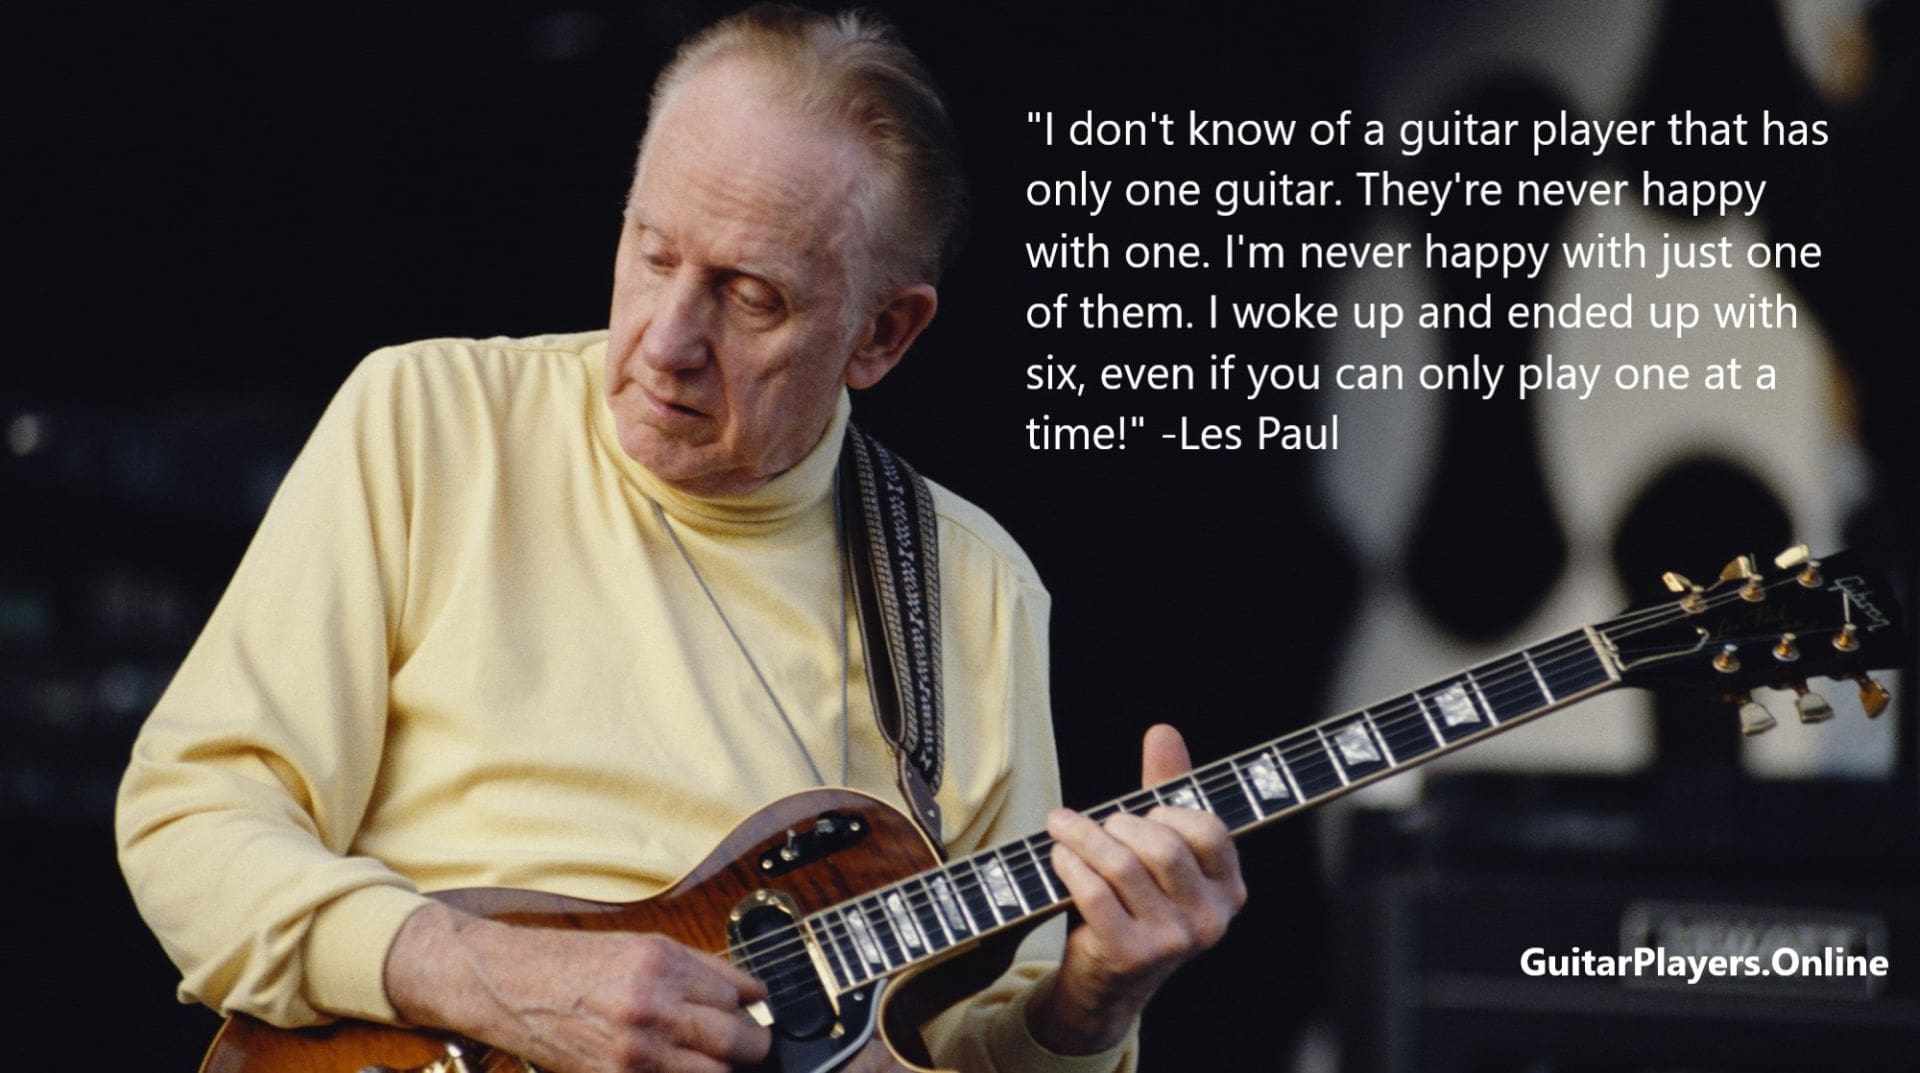 Guitar philosophical Les Paul says one guitar is not enough